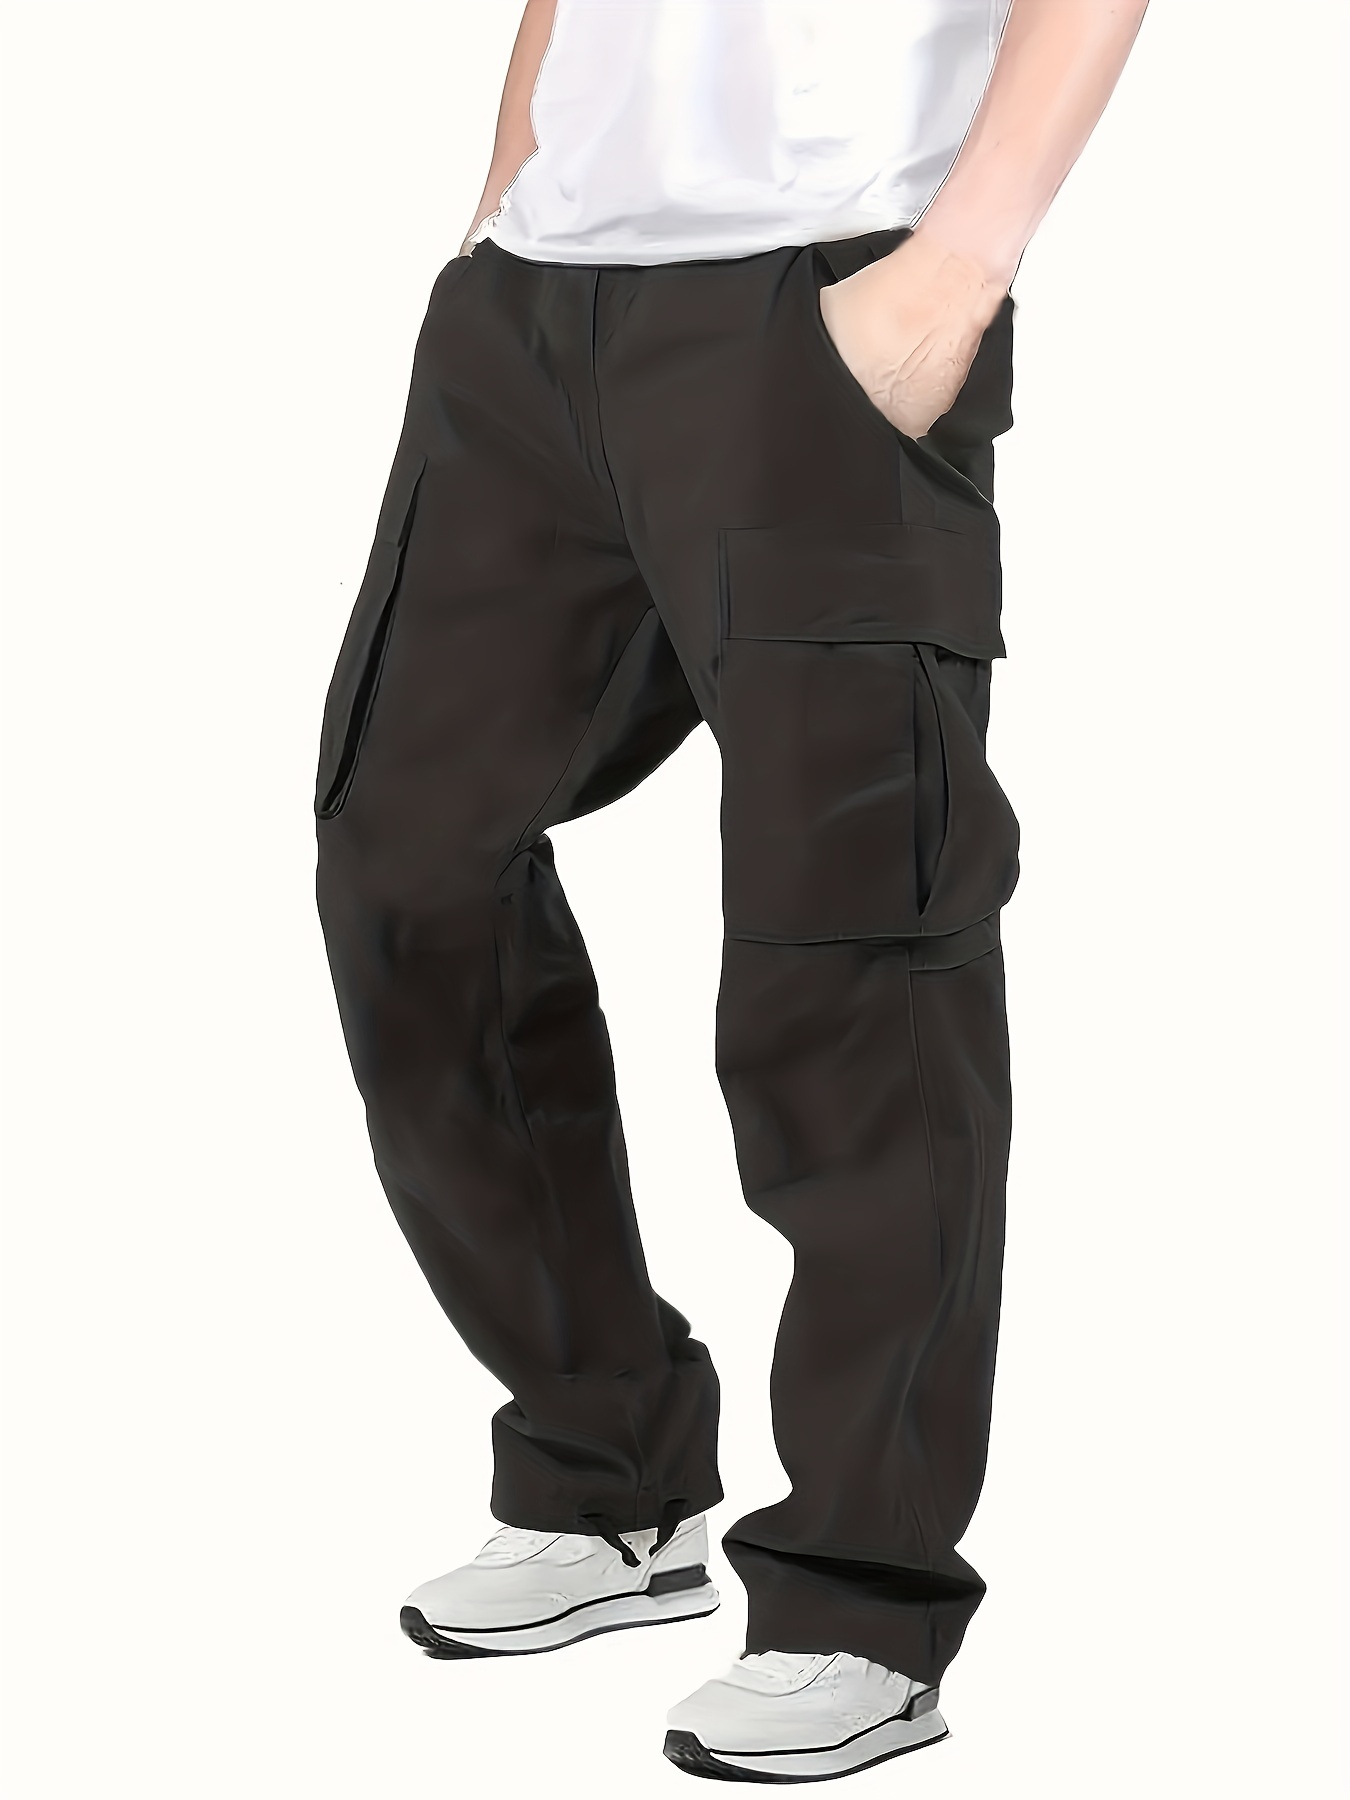 Mens Flap Pocket Cargo Pants Casual Relaxed Fit Mid-Waist Solid  Multi-Pocket Straight Leg Loose Pant